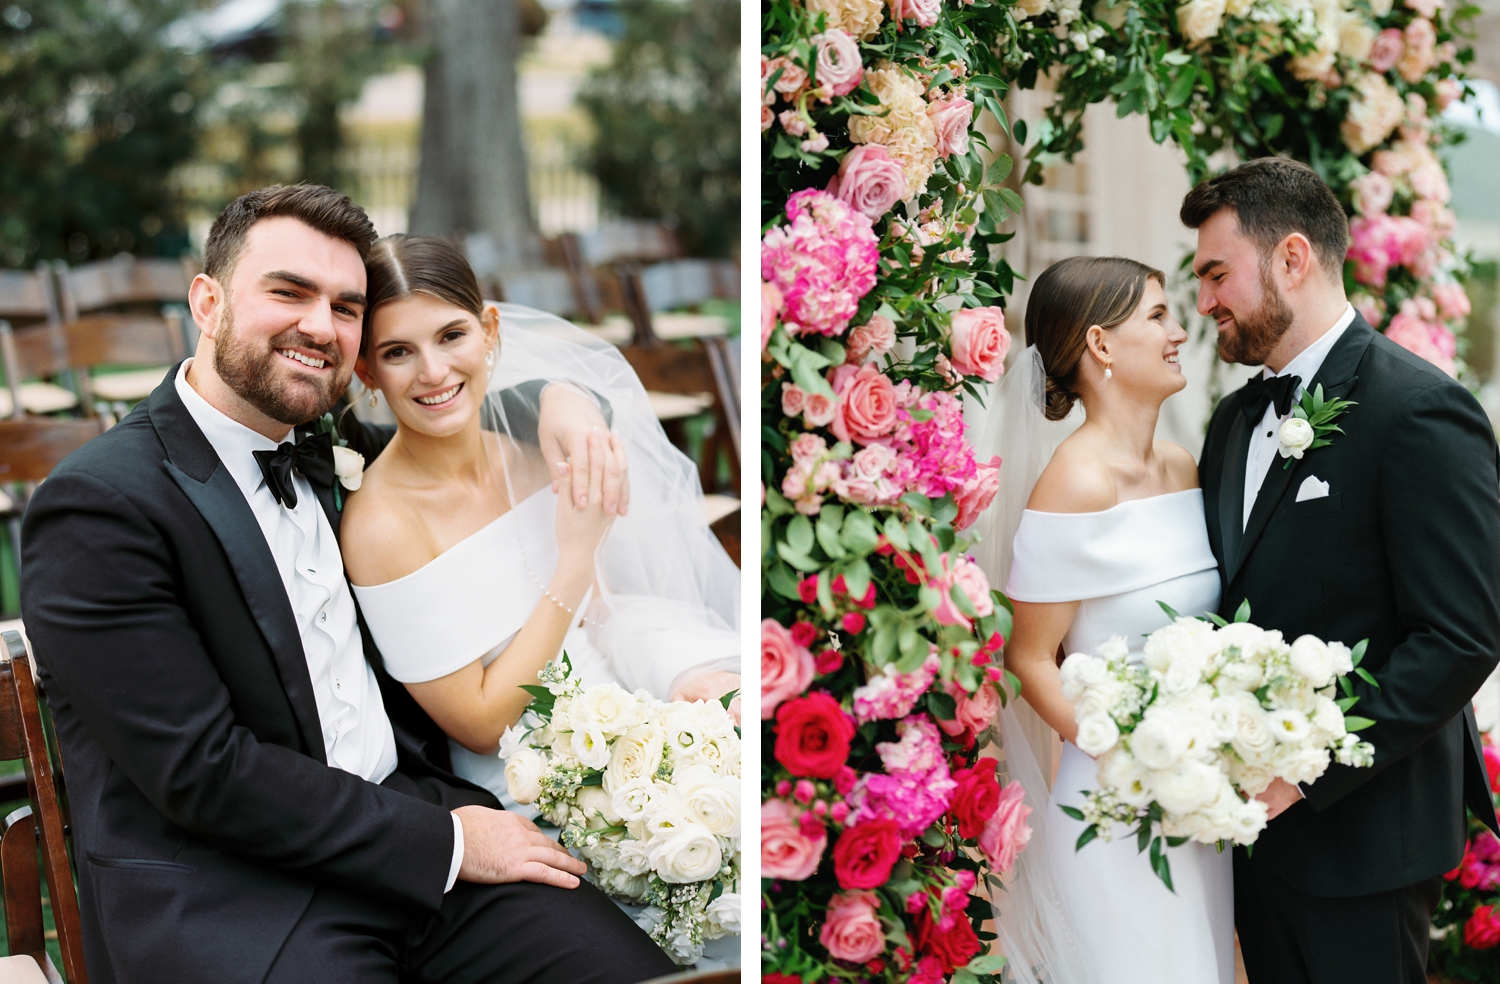 How to budget for your luxury floral wedding in Austin, Texas from a wedding florist. | Austin Wedding Floral Designer | Reiley + Rose